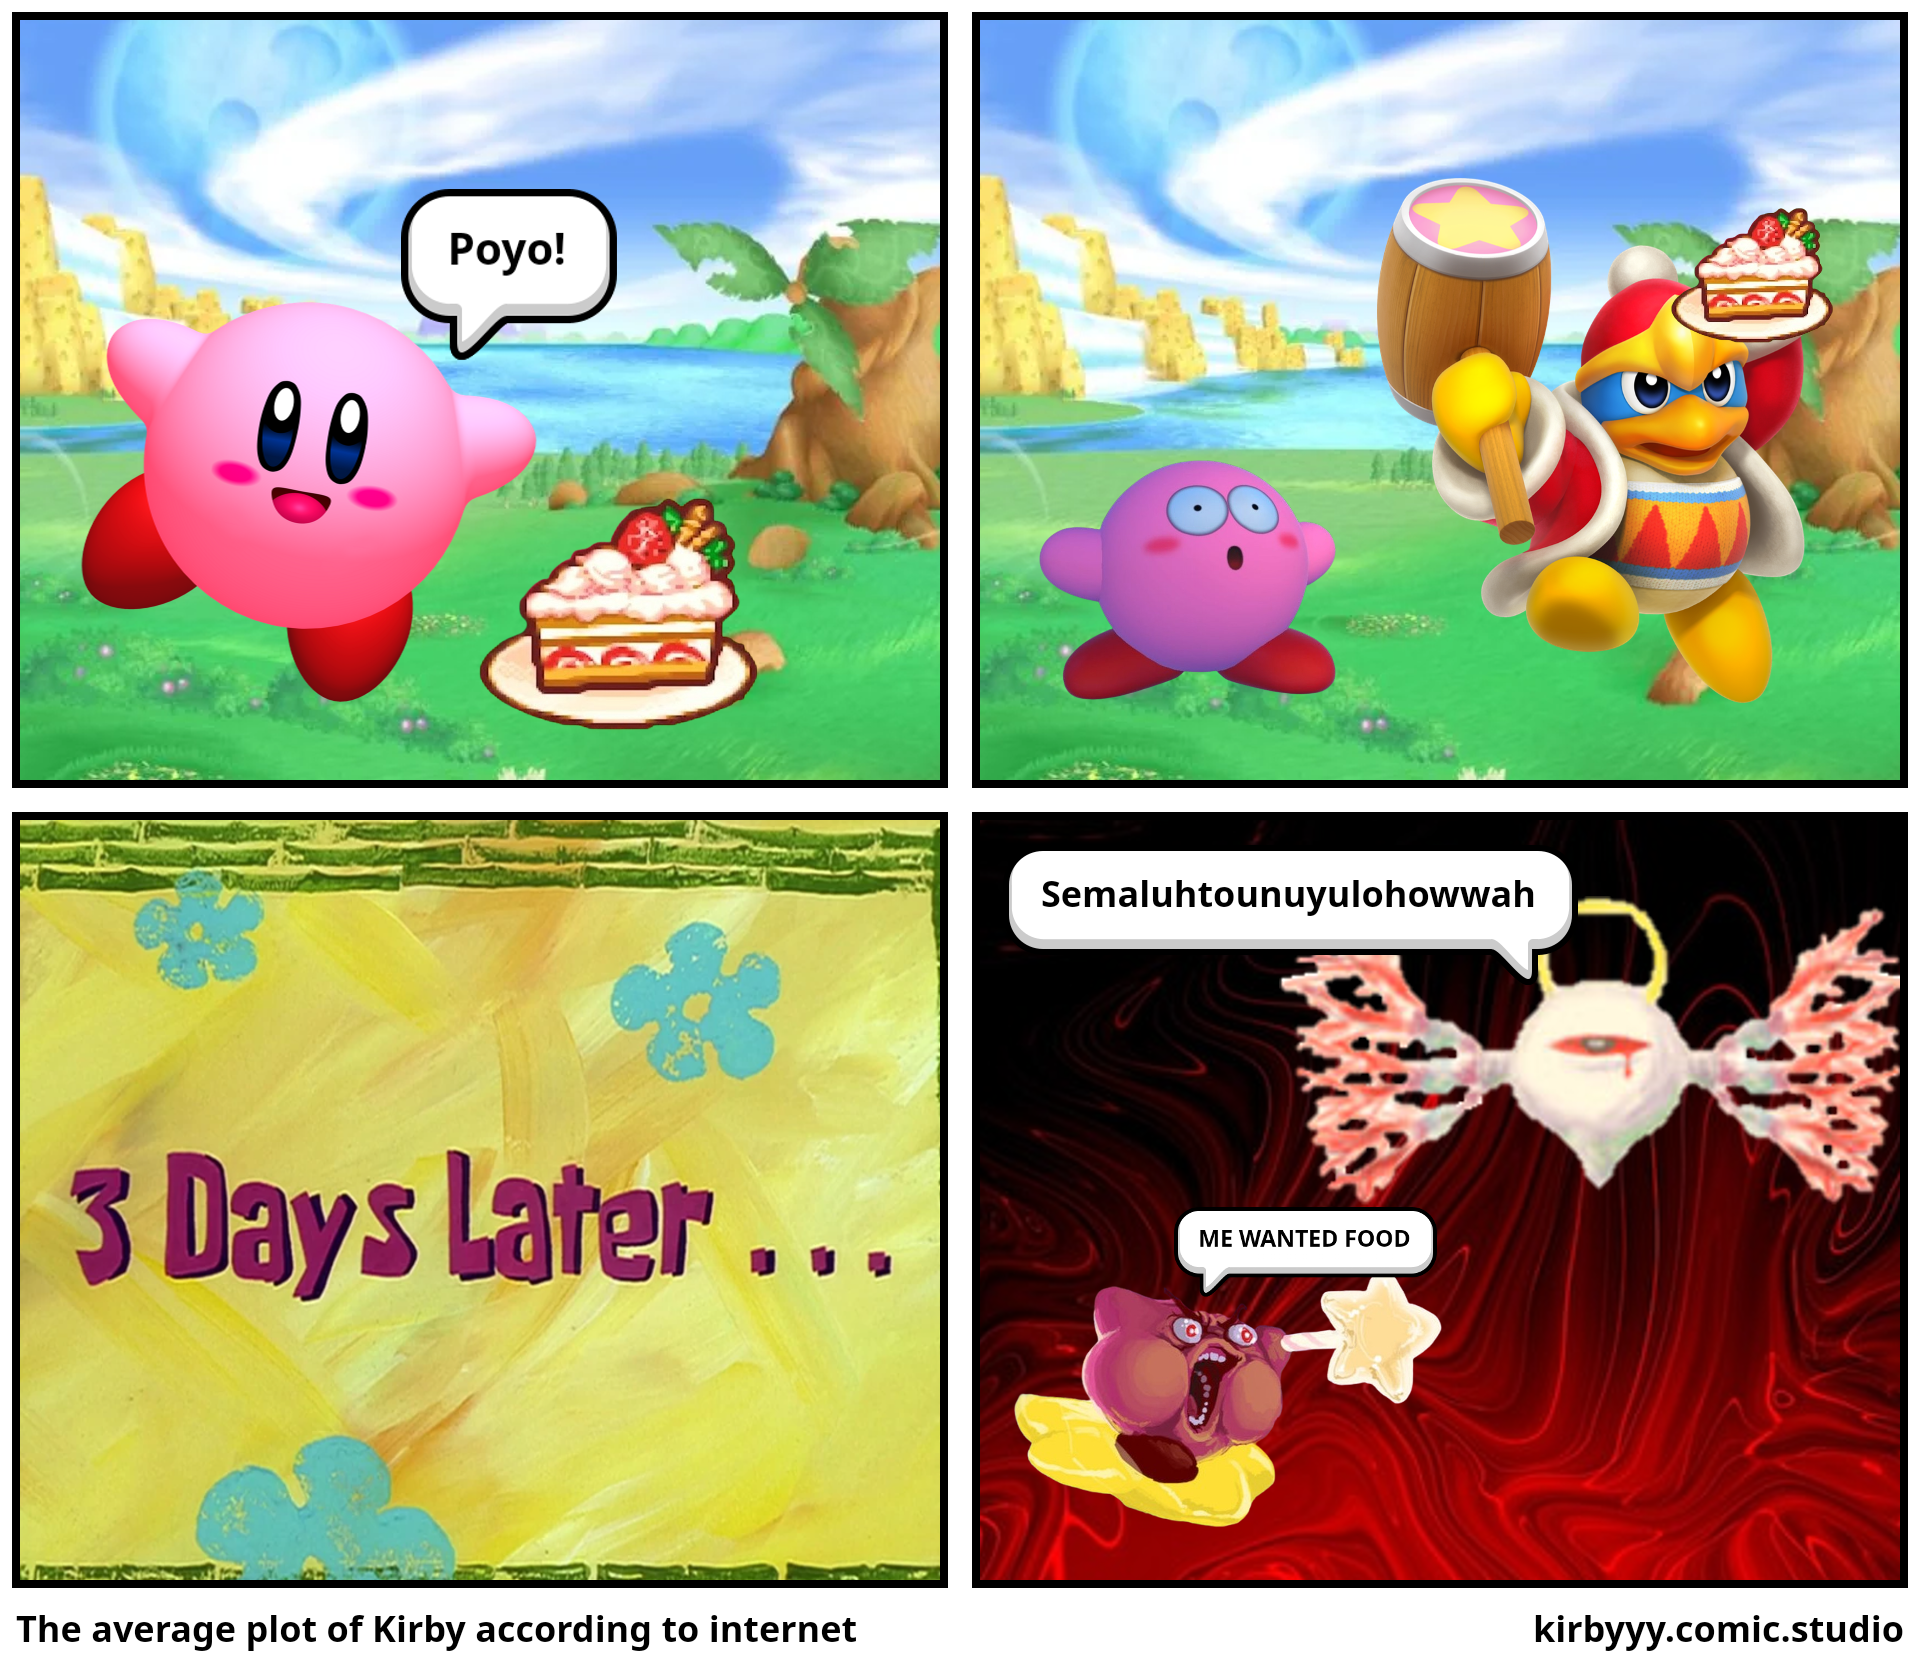 The average plot of Kirby according to internet